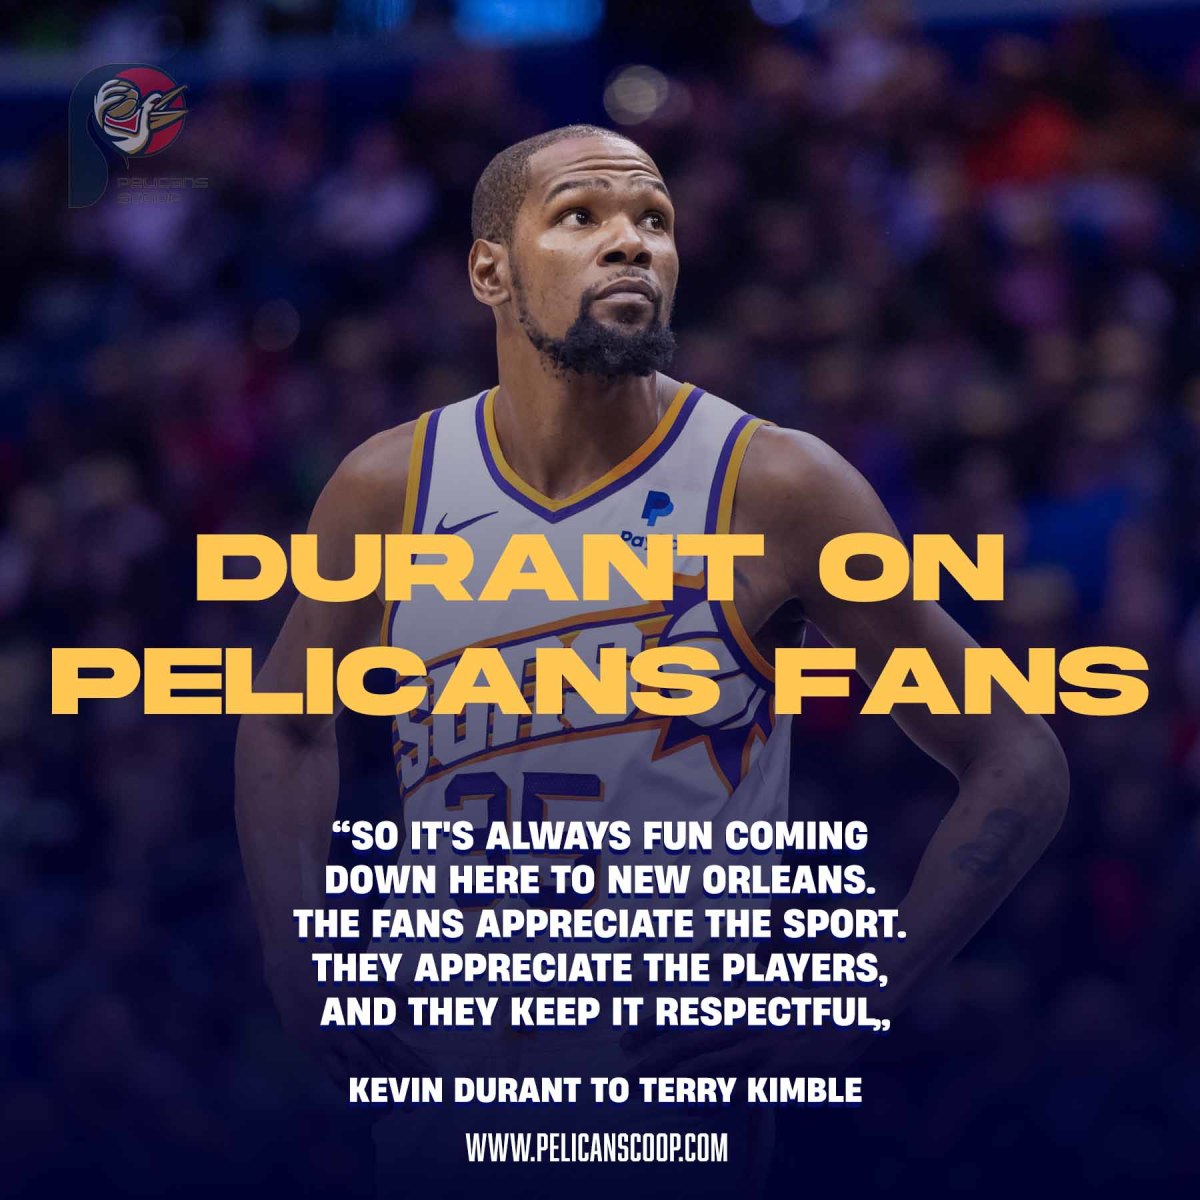 Kevin Durant on Pelicans Fans